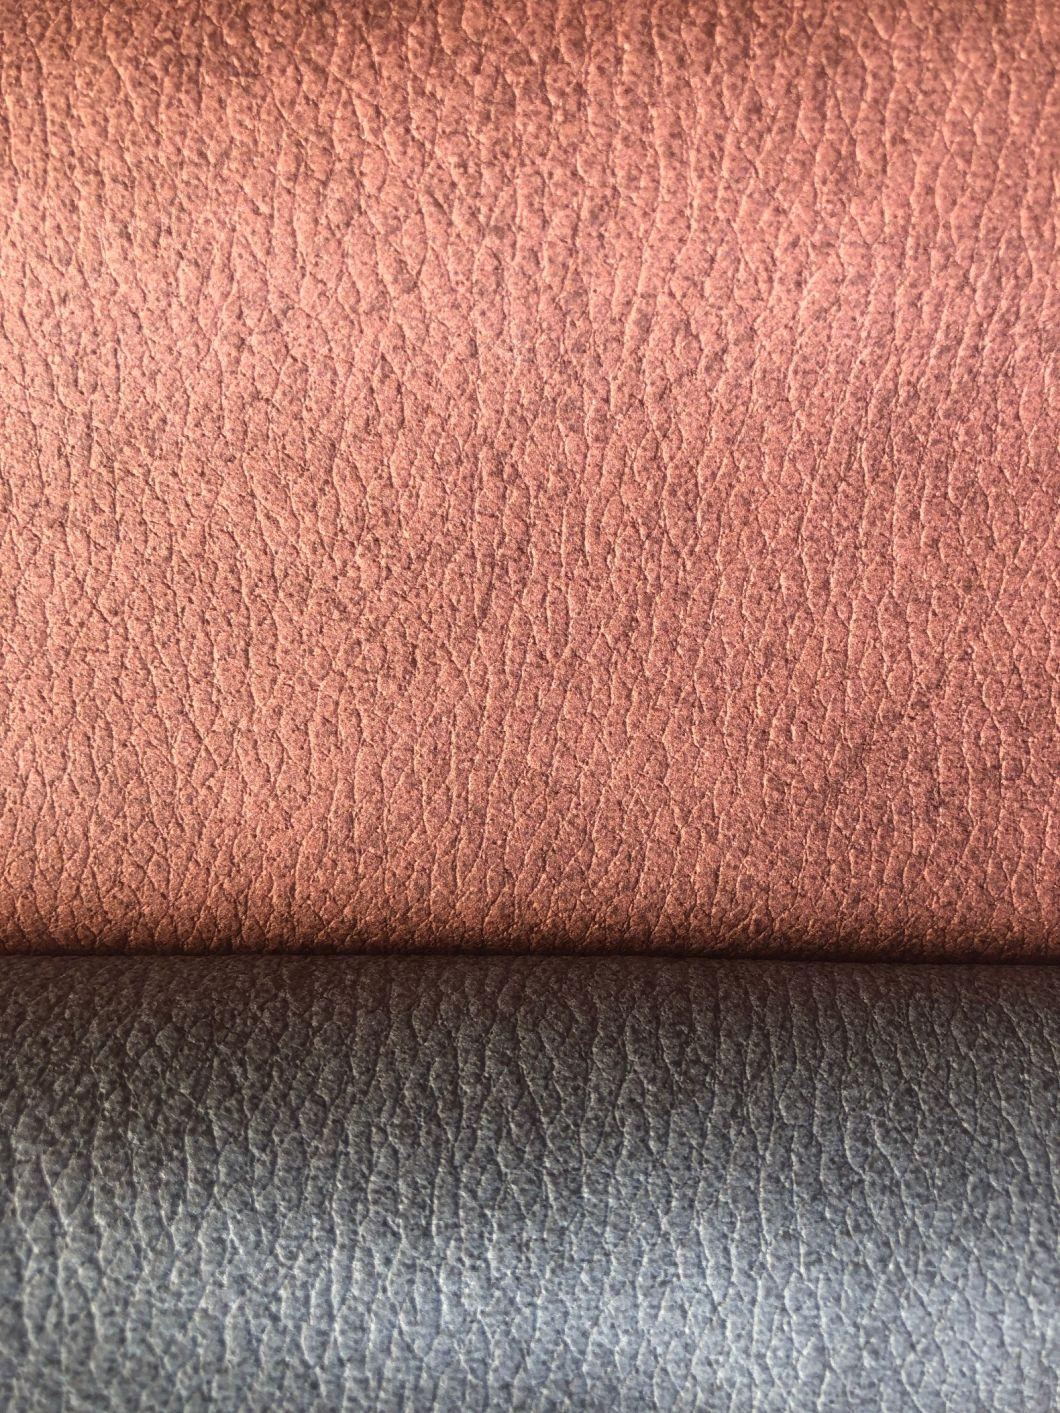 Polyester Leather Looking Knitting Velvet Fabric Furniture Fabric Upholstery Fabric (TL005)